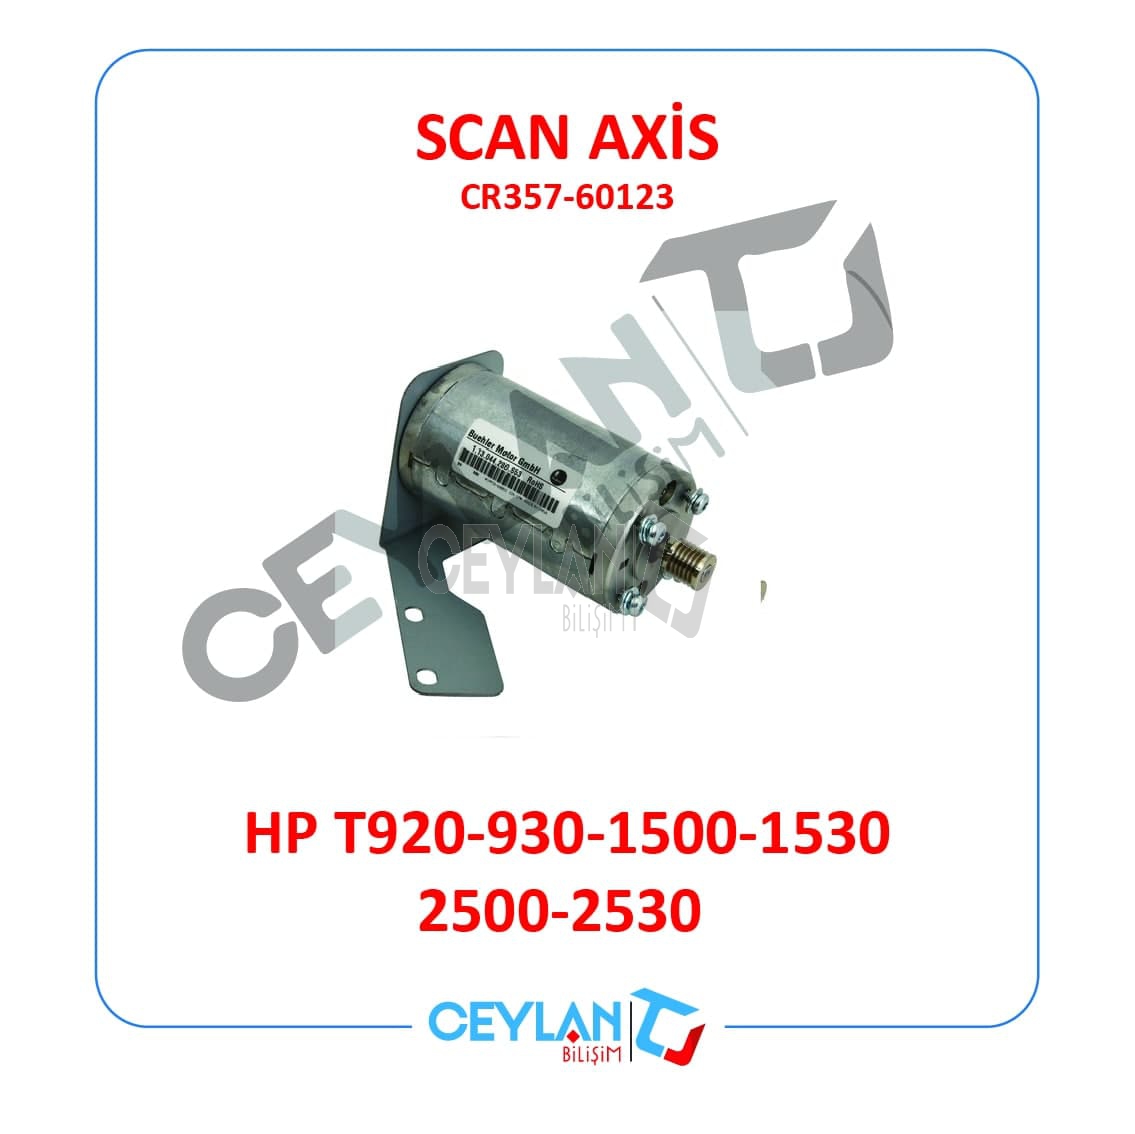 HP Scan Axis